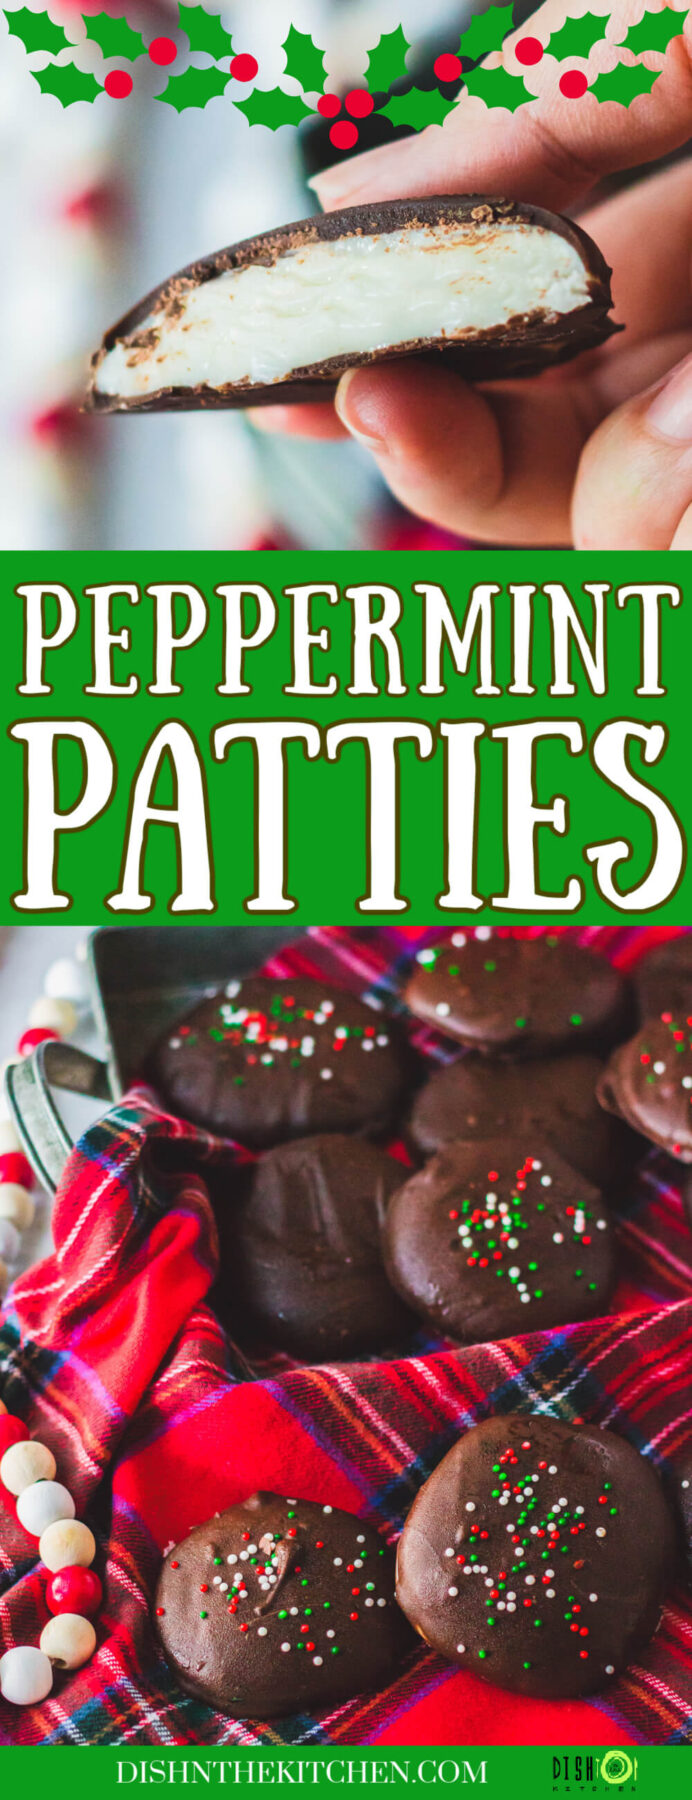 Pinterest image of a group of dark chocolate coated peppermint patty candies on a plaid tablecloth.